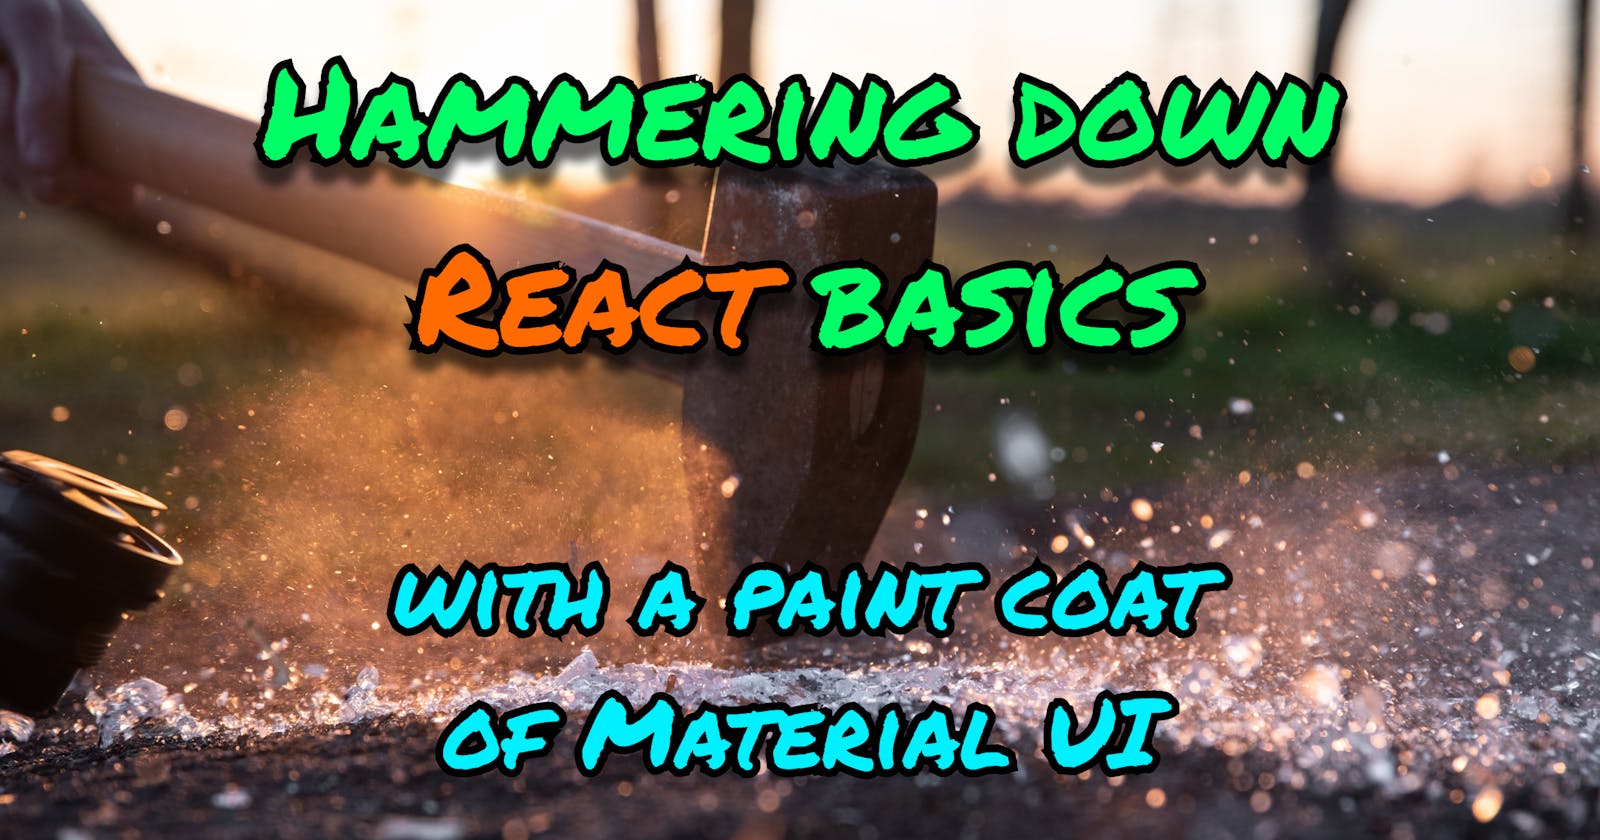 Hammering down React basics, with a paint coat of Material UI